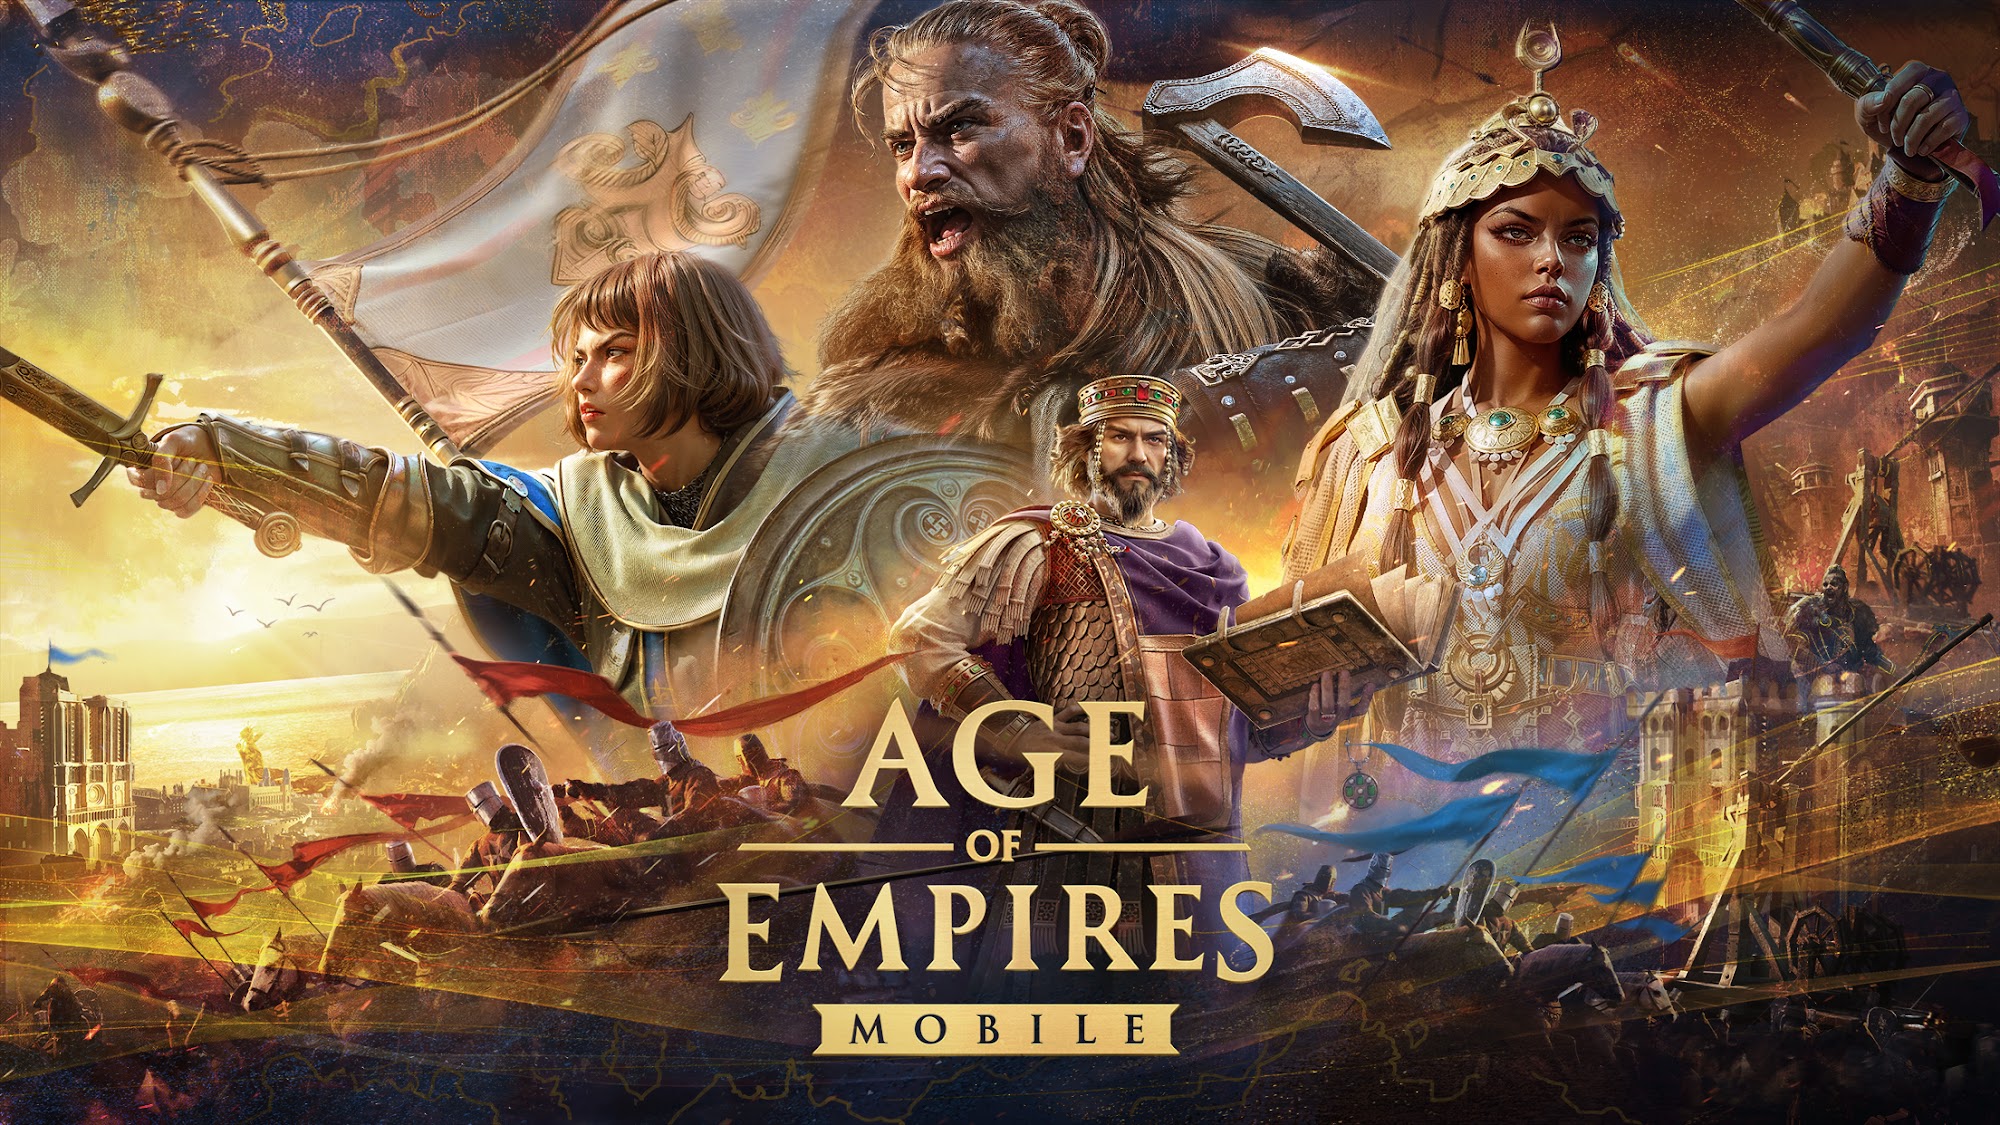 Scarica Age of Empires Mobile gratis per Android.